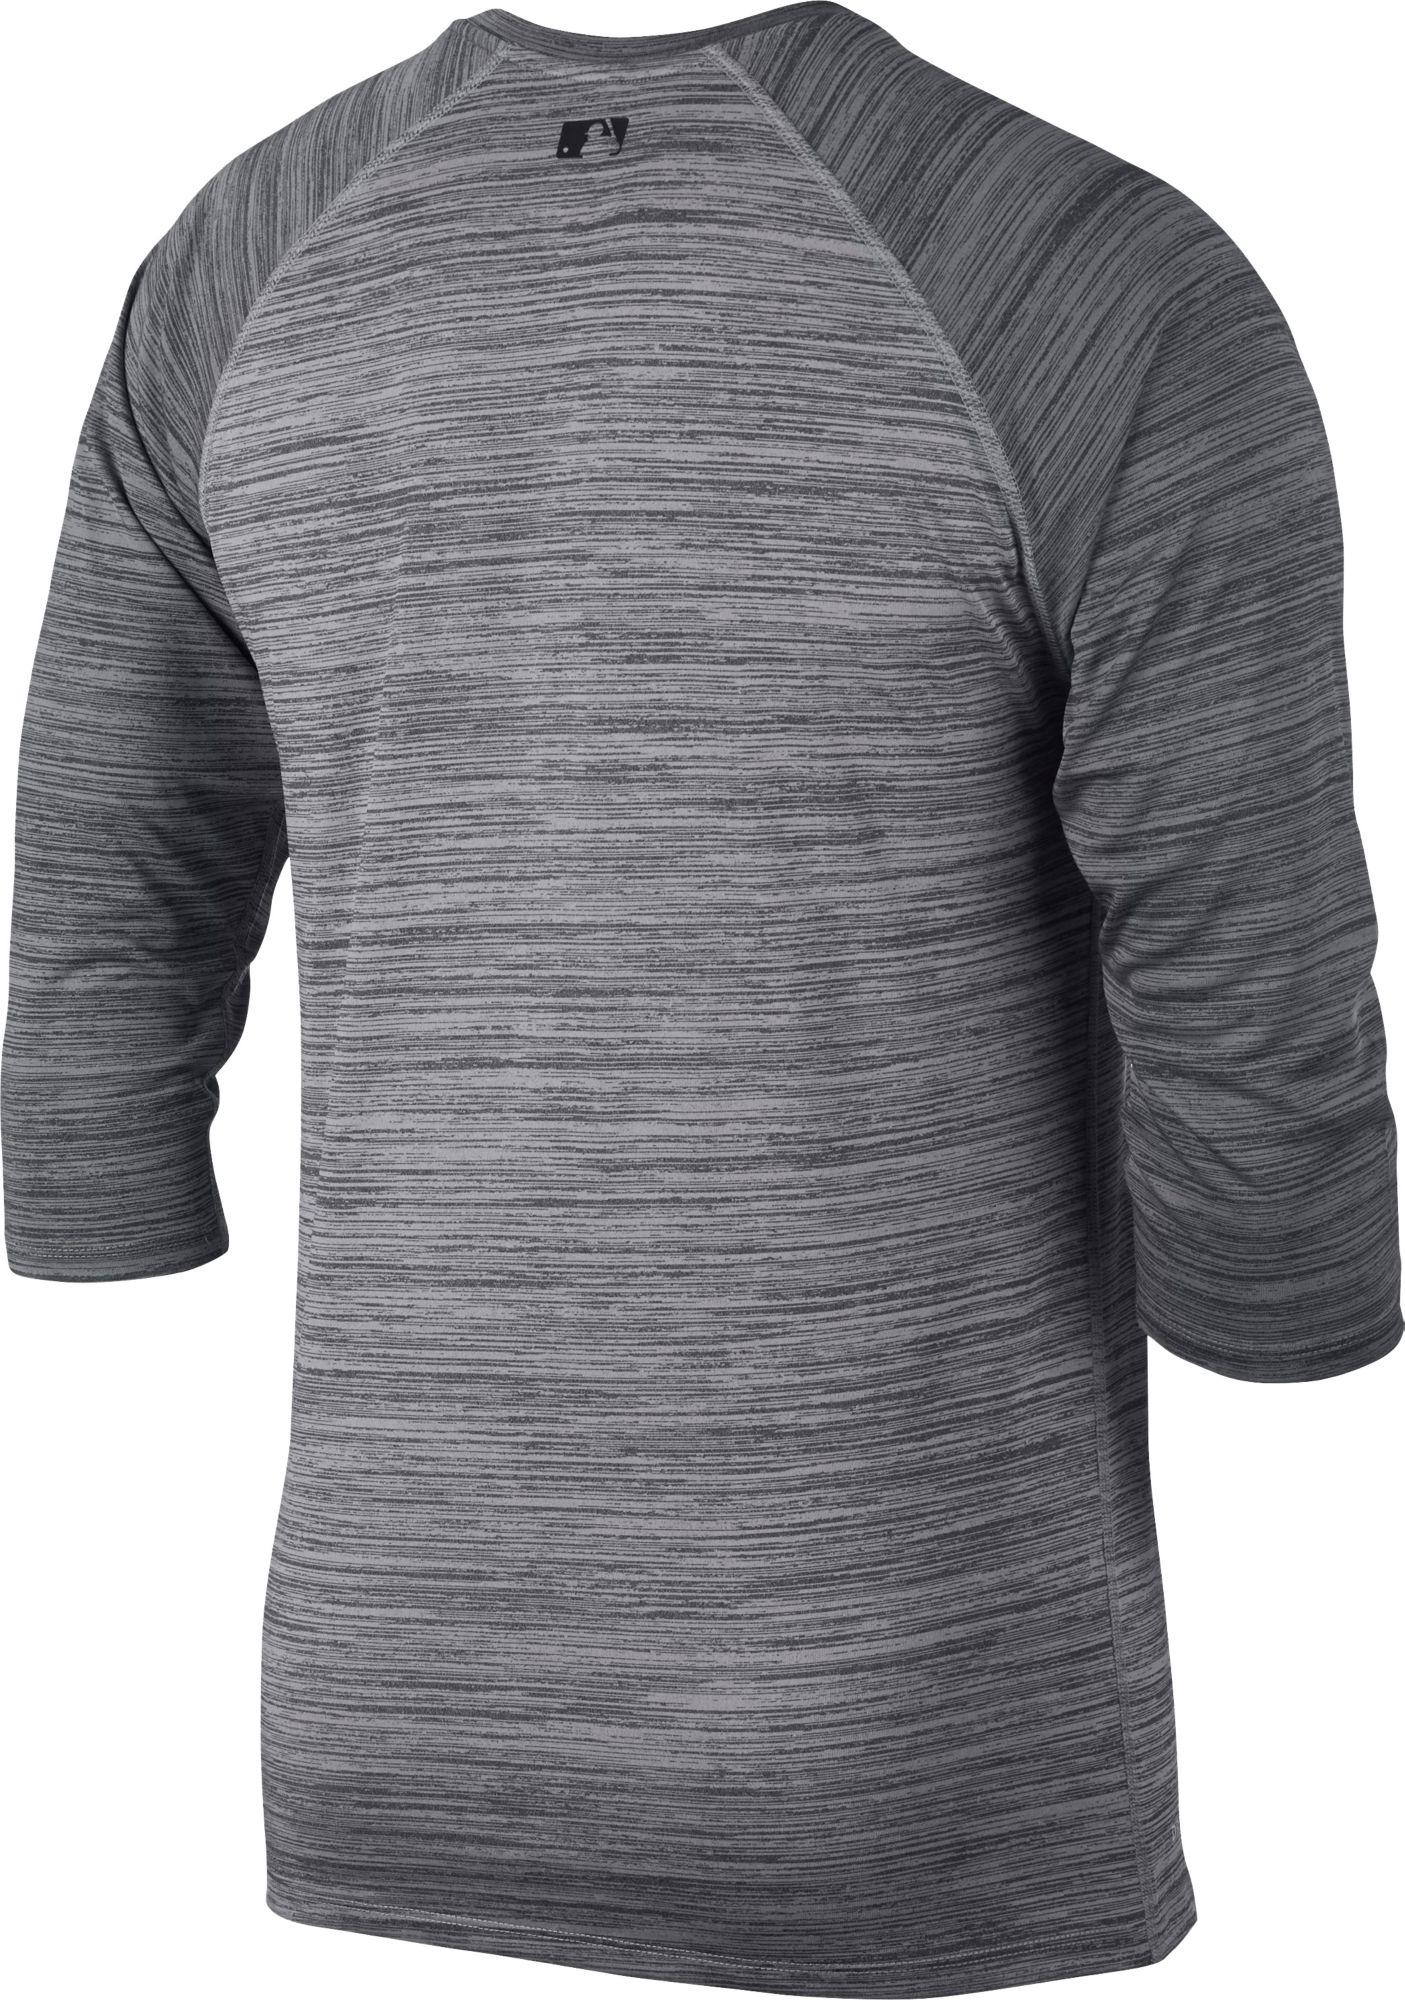 Download Nike Synthetic Dry Mlb 3/4 Sleeve Baseball T-shirt in Gray ...